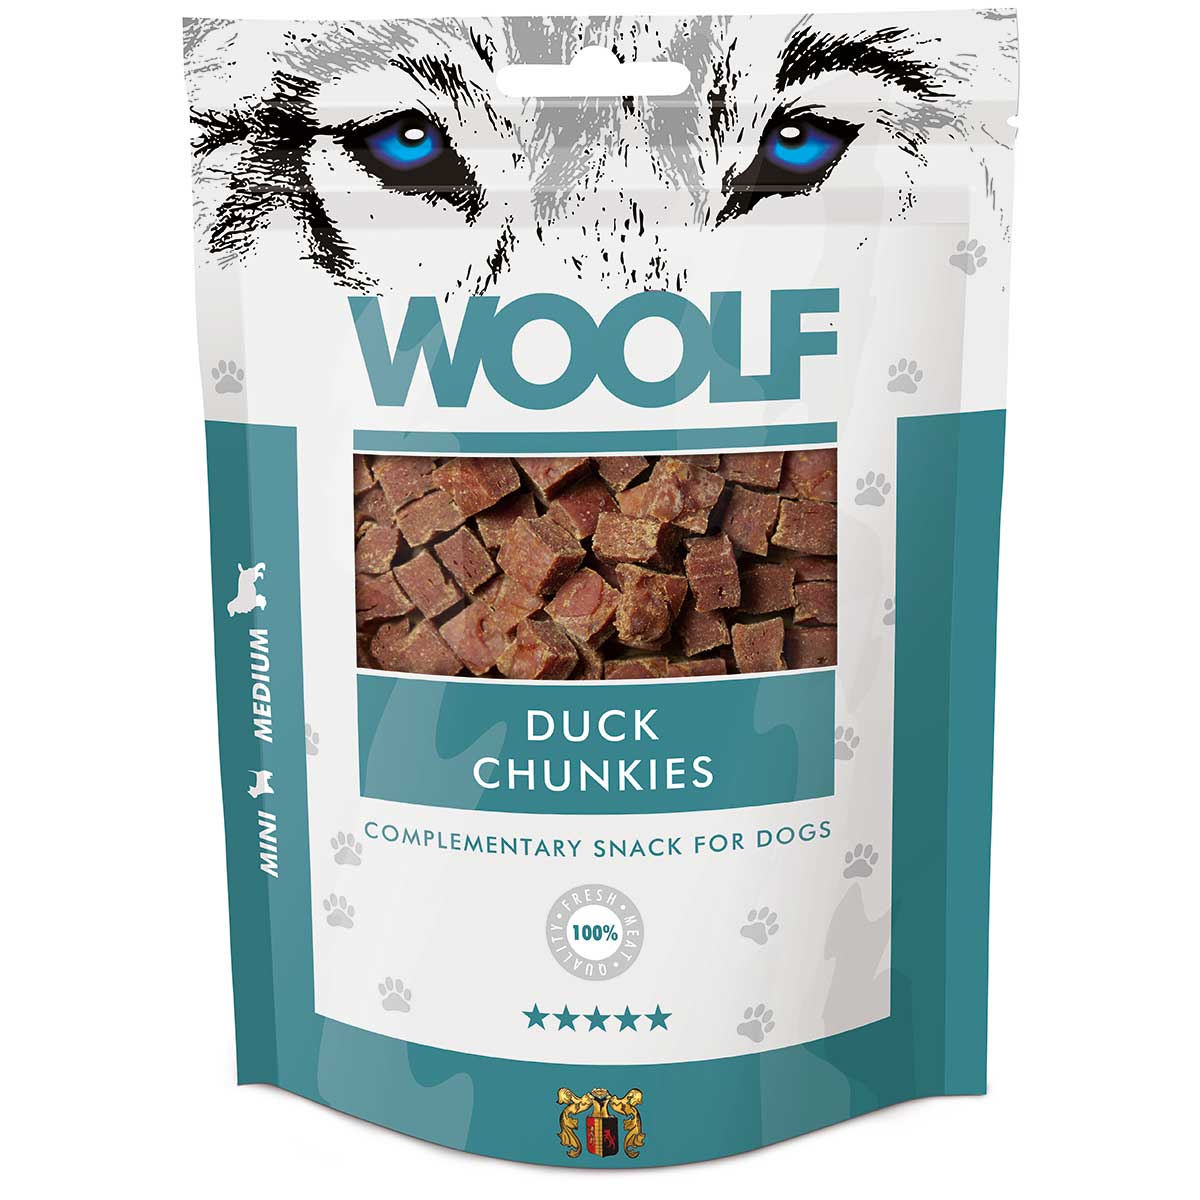 Woolf friandises pour chiens canards Chunkies